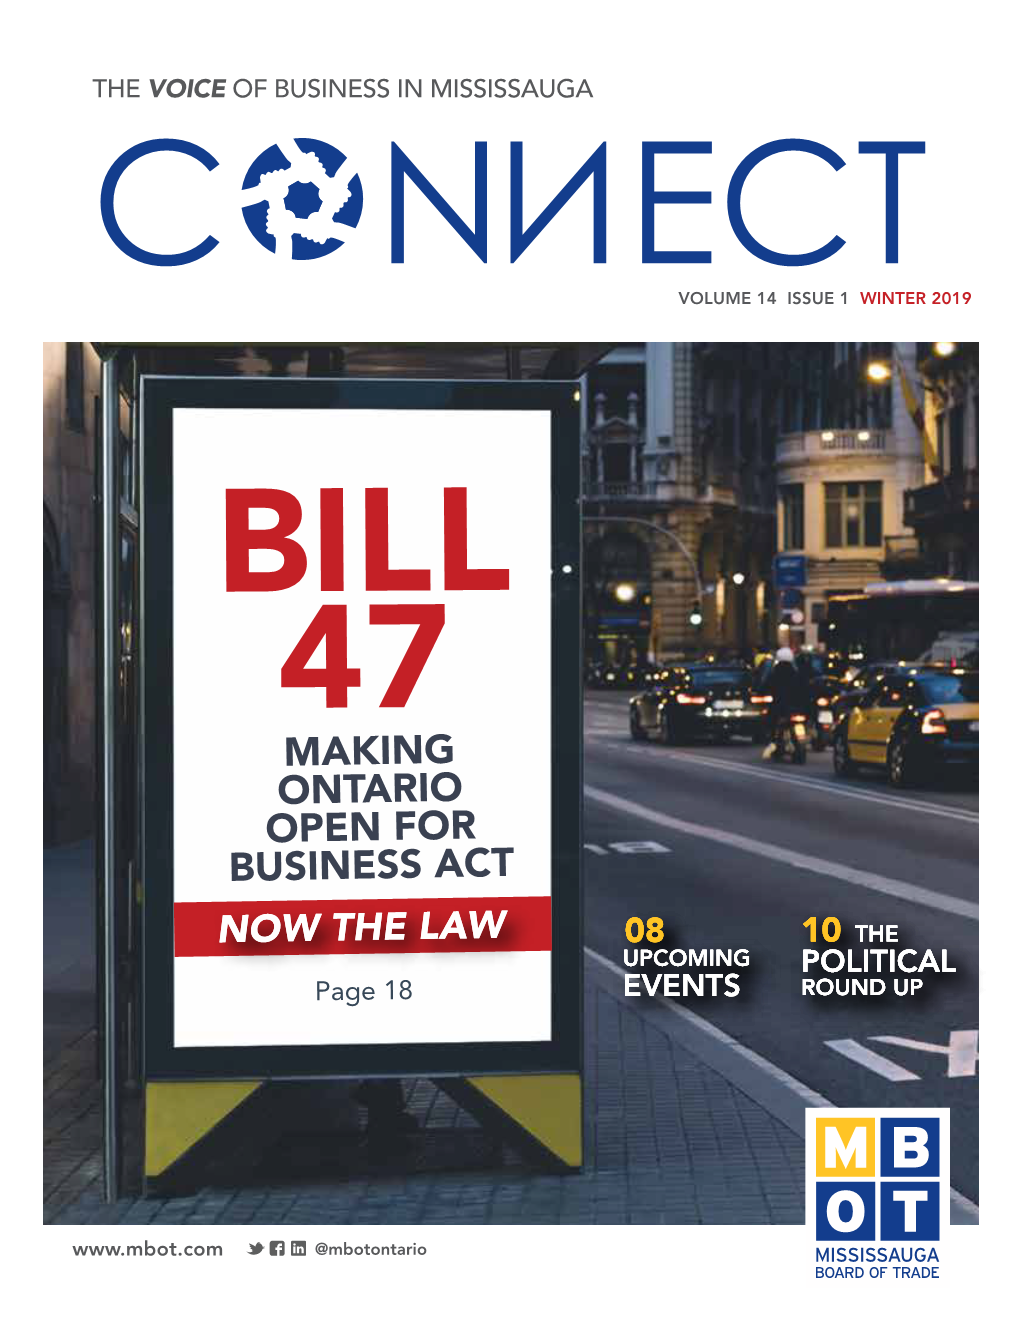 Bill 47 Making Ontario Open for Business Act